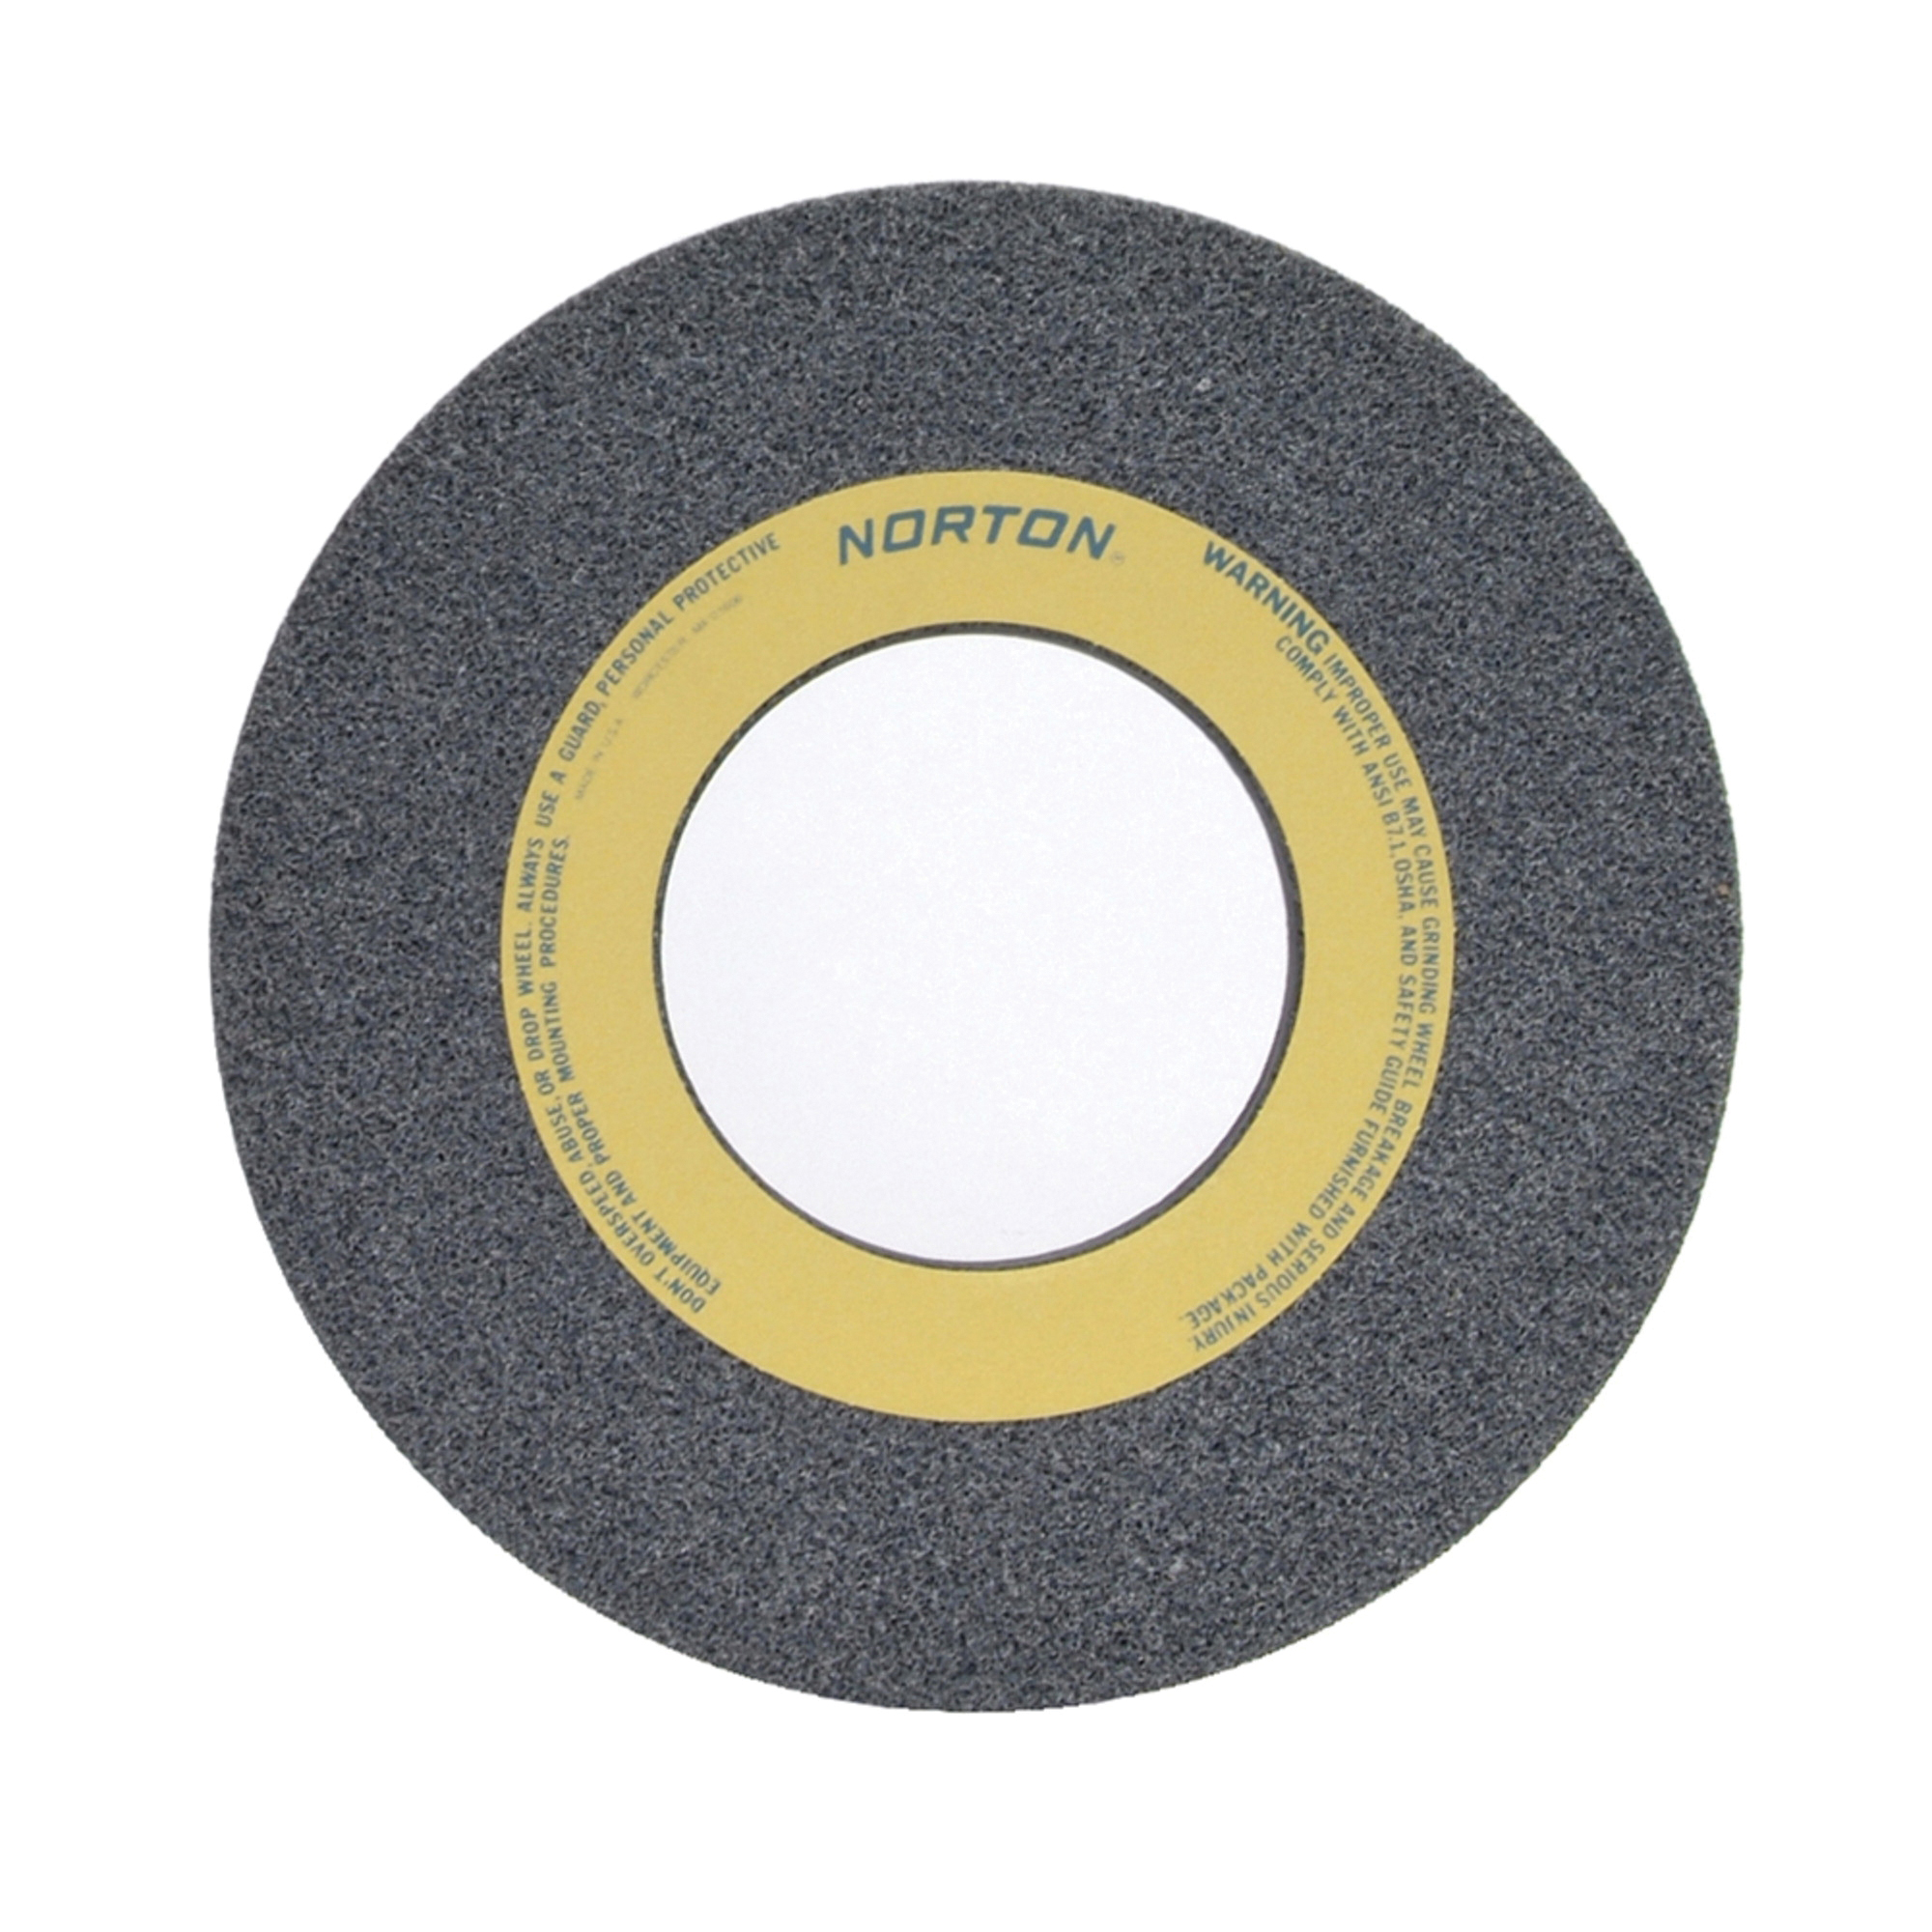 Norton® 66253364510 32A Straight Toolroom Wheel, 14 in Dia x 2 in THK, 5 in Center Hole, 60 Grit, Aluminum Oxide Abrasive